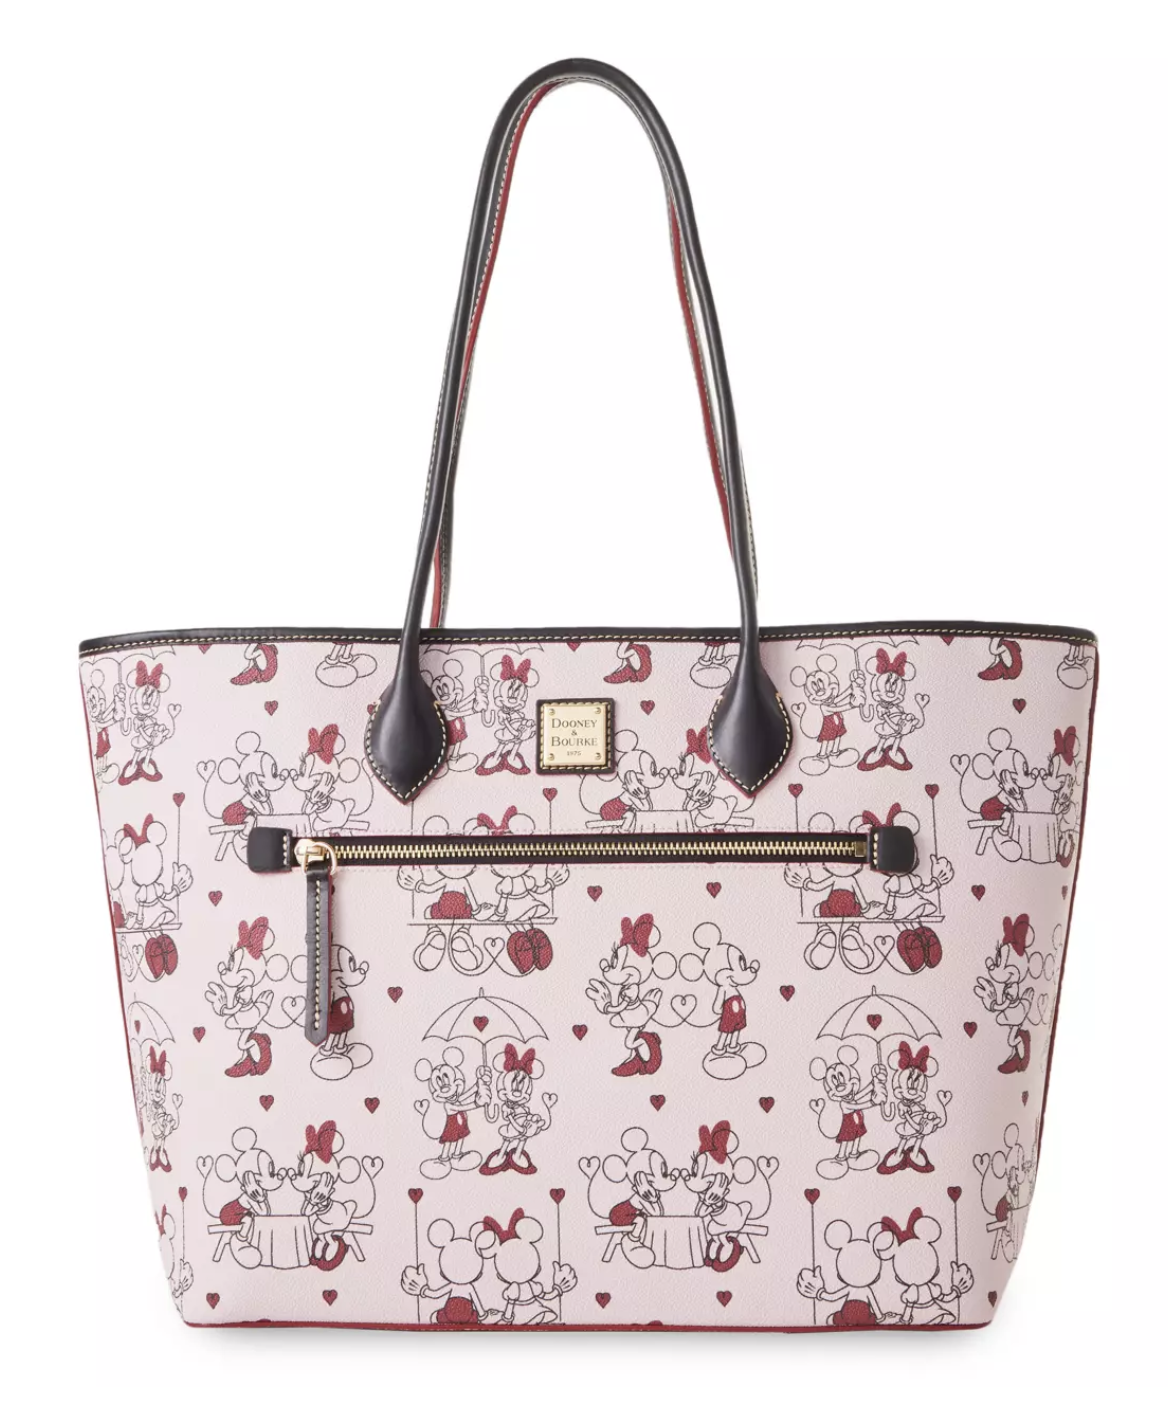 Disney Just Released a NEW Dooney & Bourke Valentine's Day Collection ...